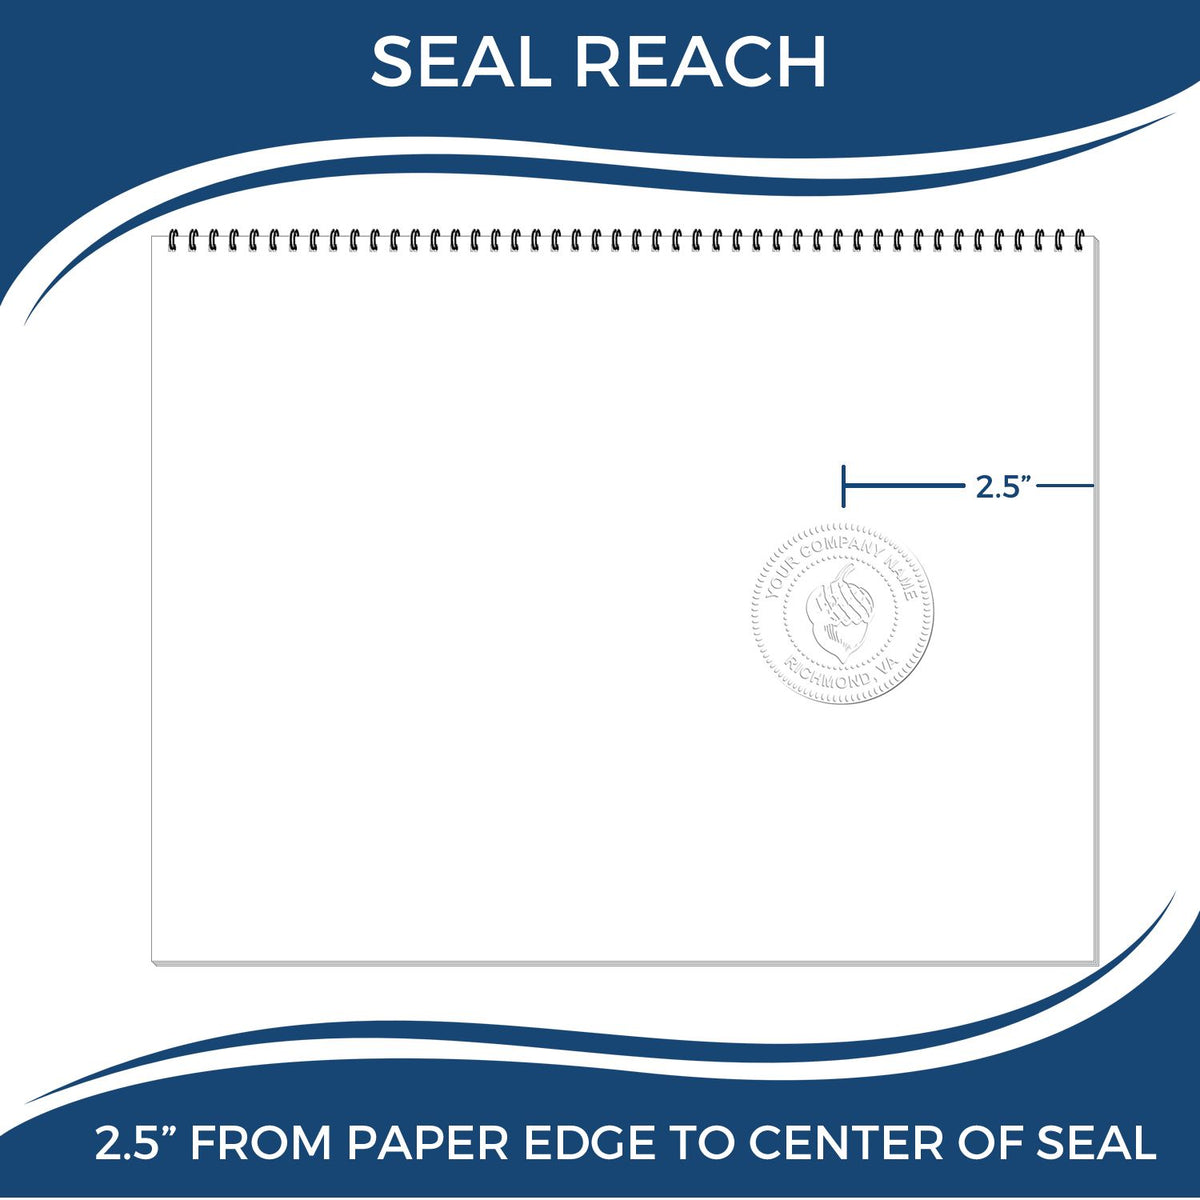 An infographic showing the seal reach which is represented by a ruler and a miniature seal image of the Heavy Duty Cast Iron Idaho Geologist Seal Embosser